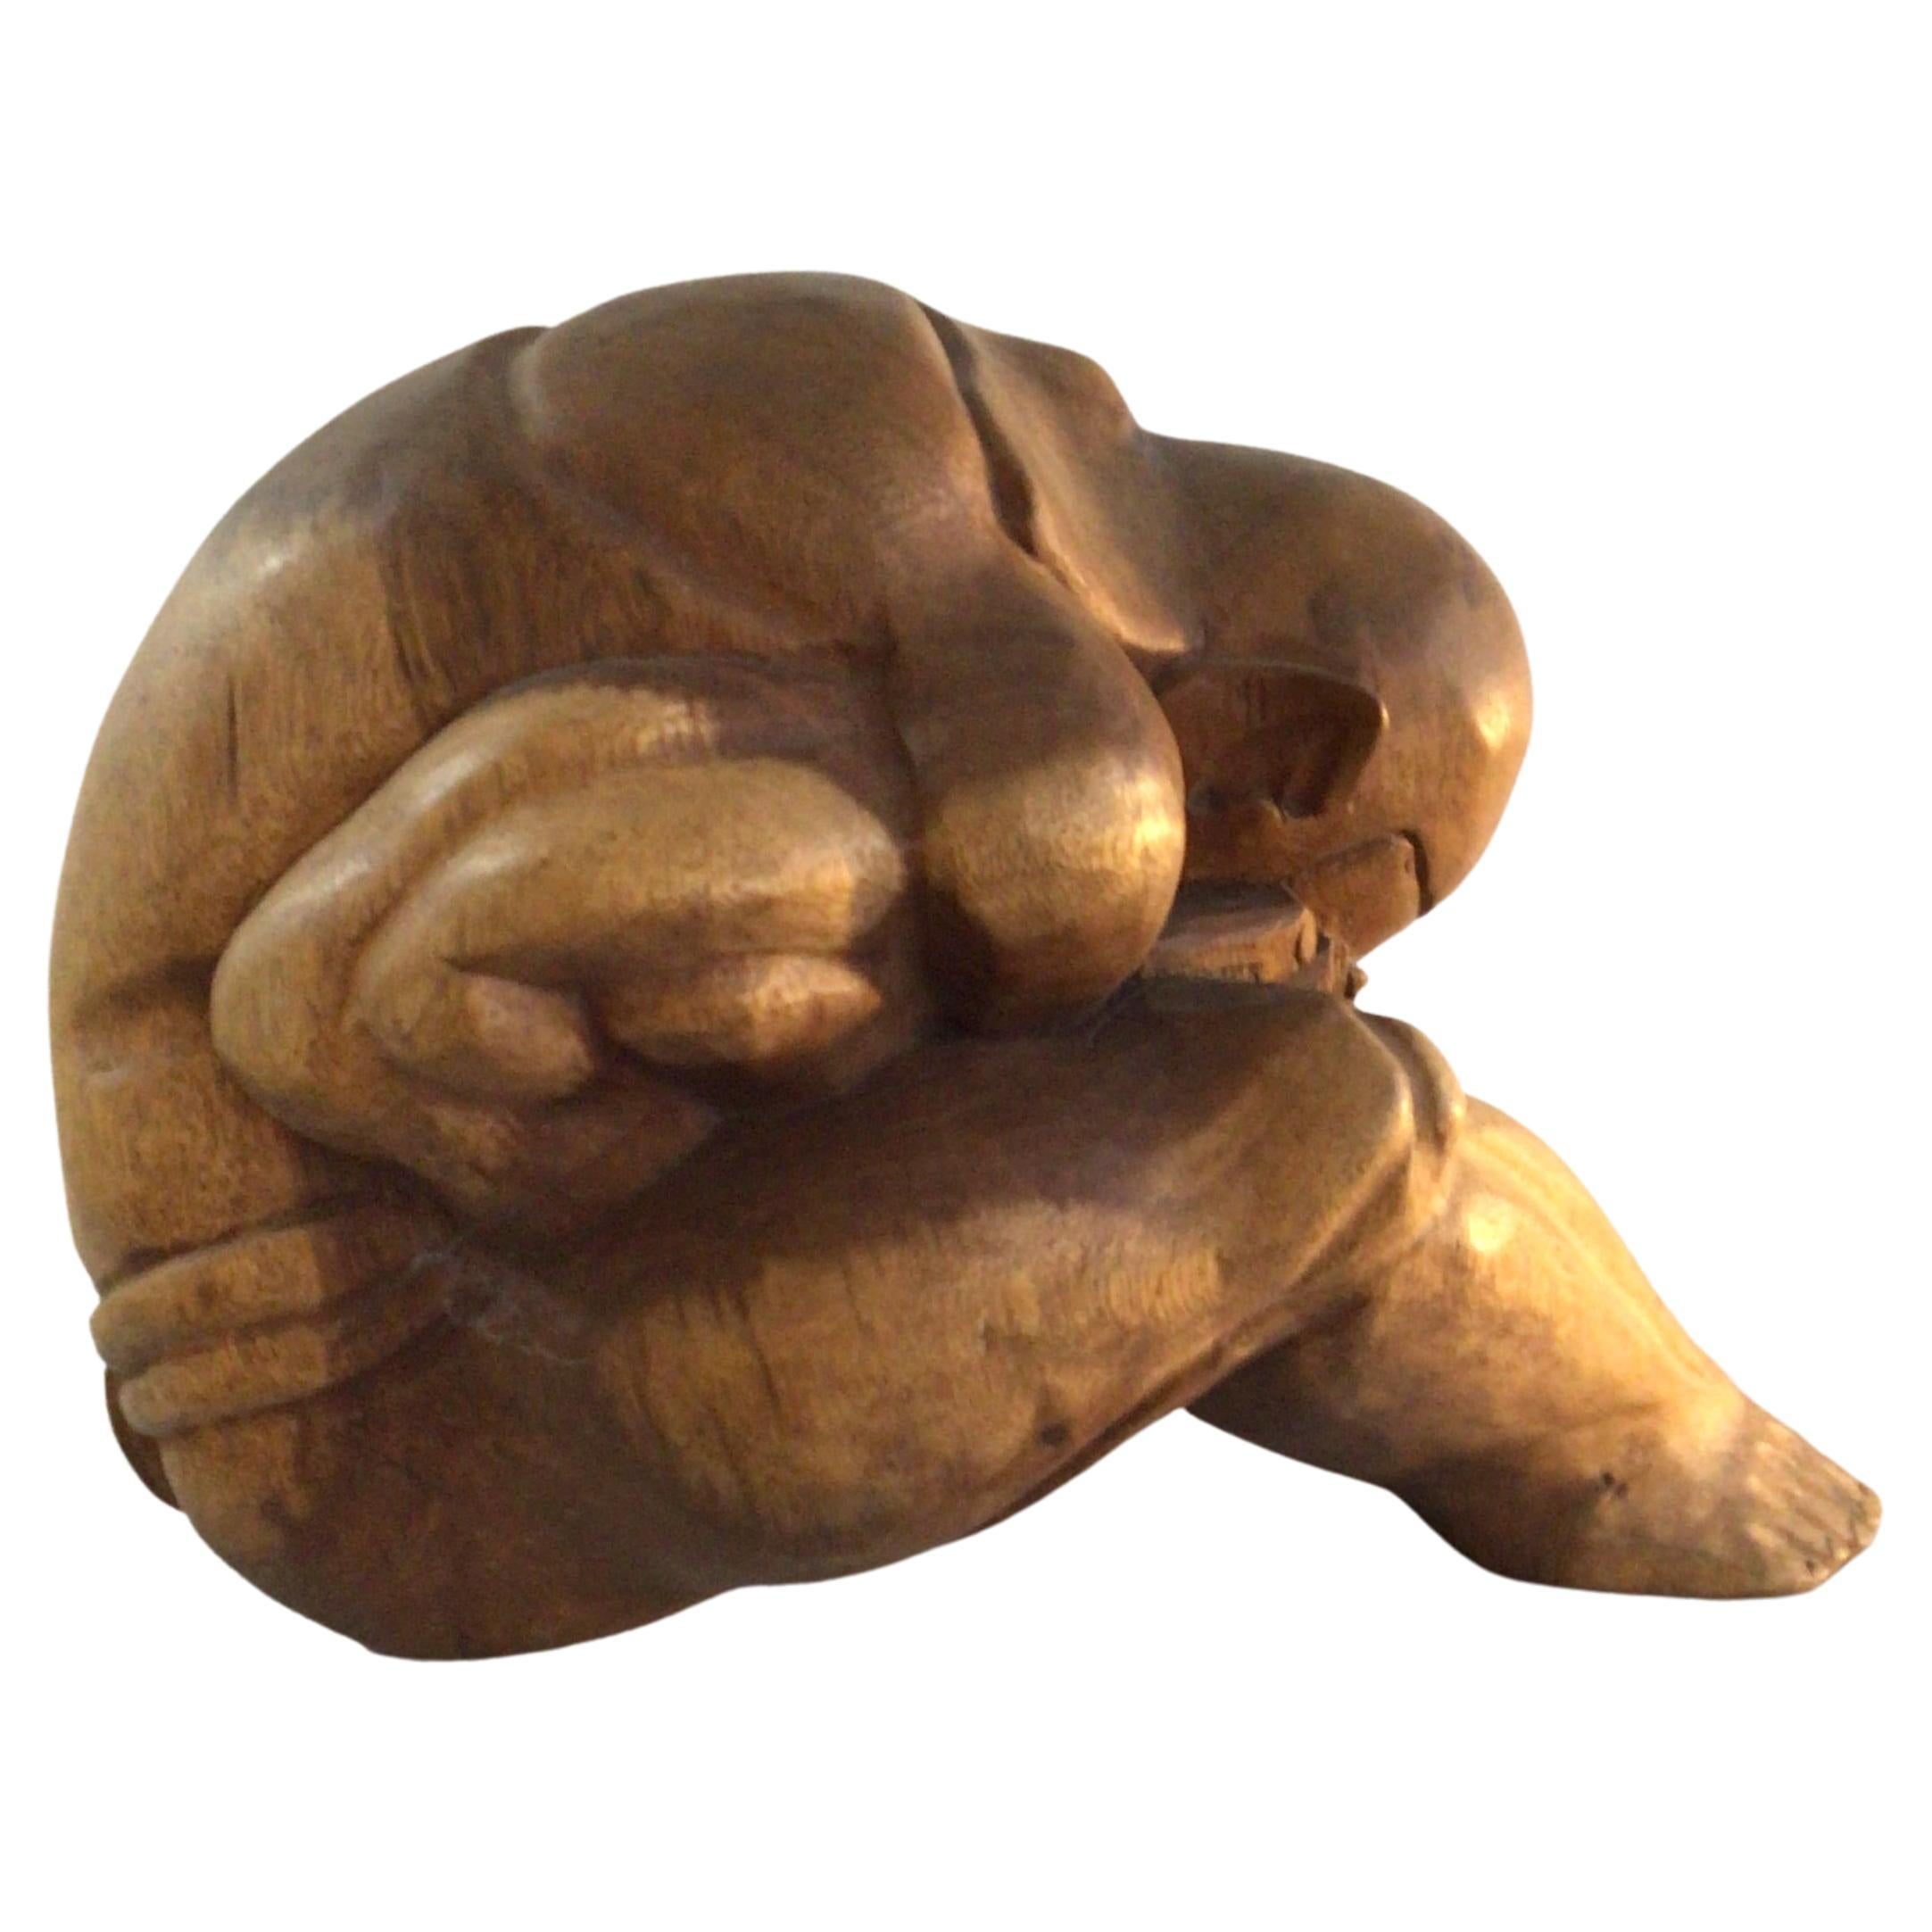 1960s Hand Carved Wood Sculpture Of Man Praying / Weeping